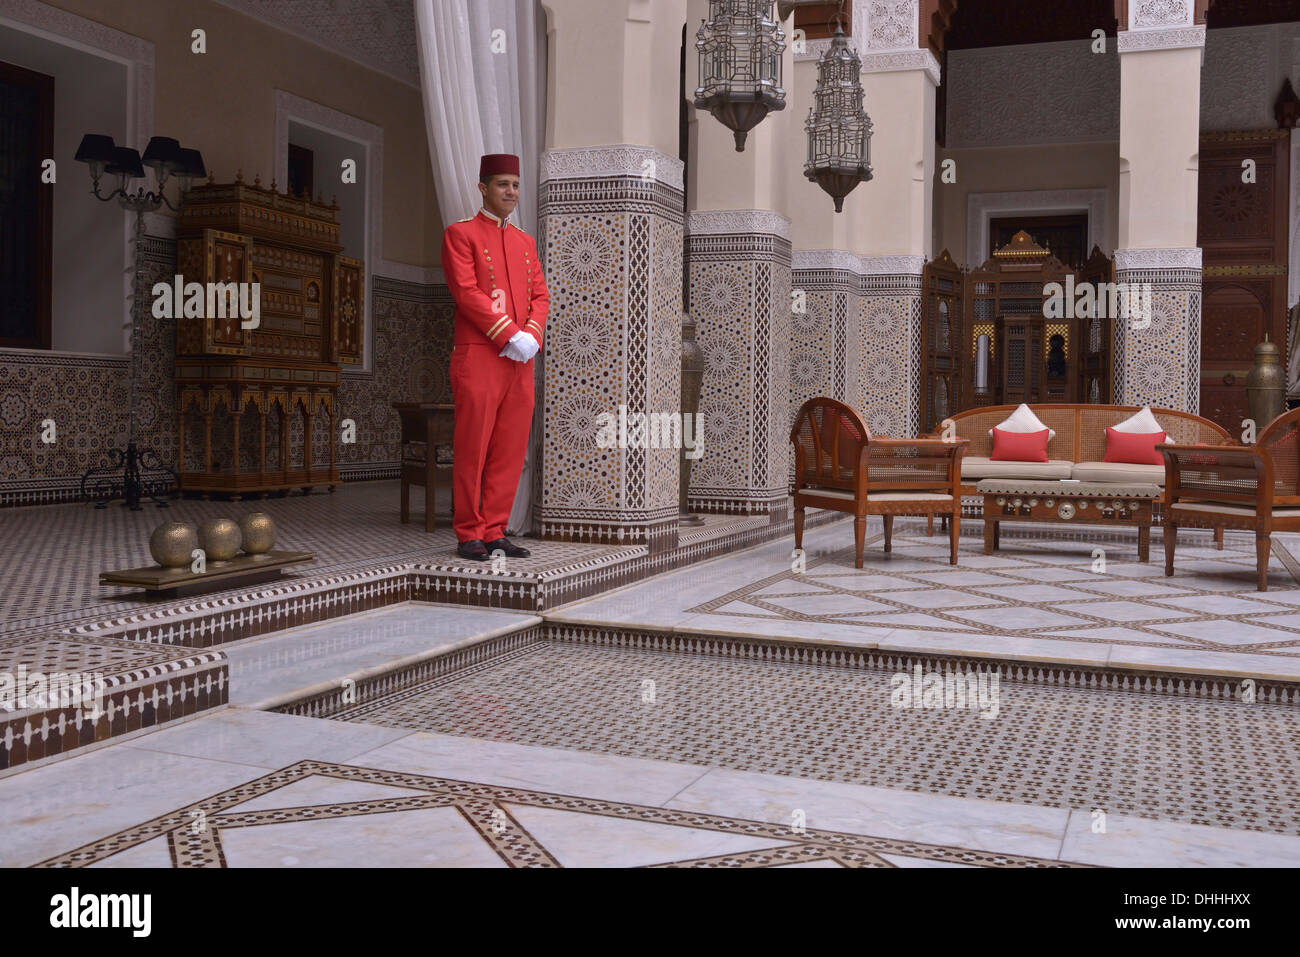 Staff at the Royal Mansour Hotel, Marrakesh, Marrakesh-Tensift-El Haouz region, Morocco Stock Photo